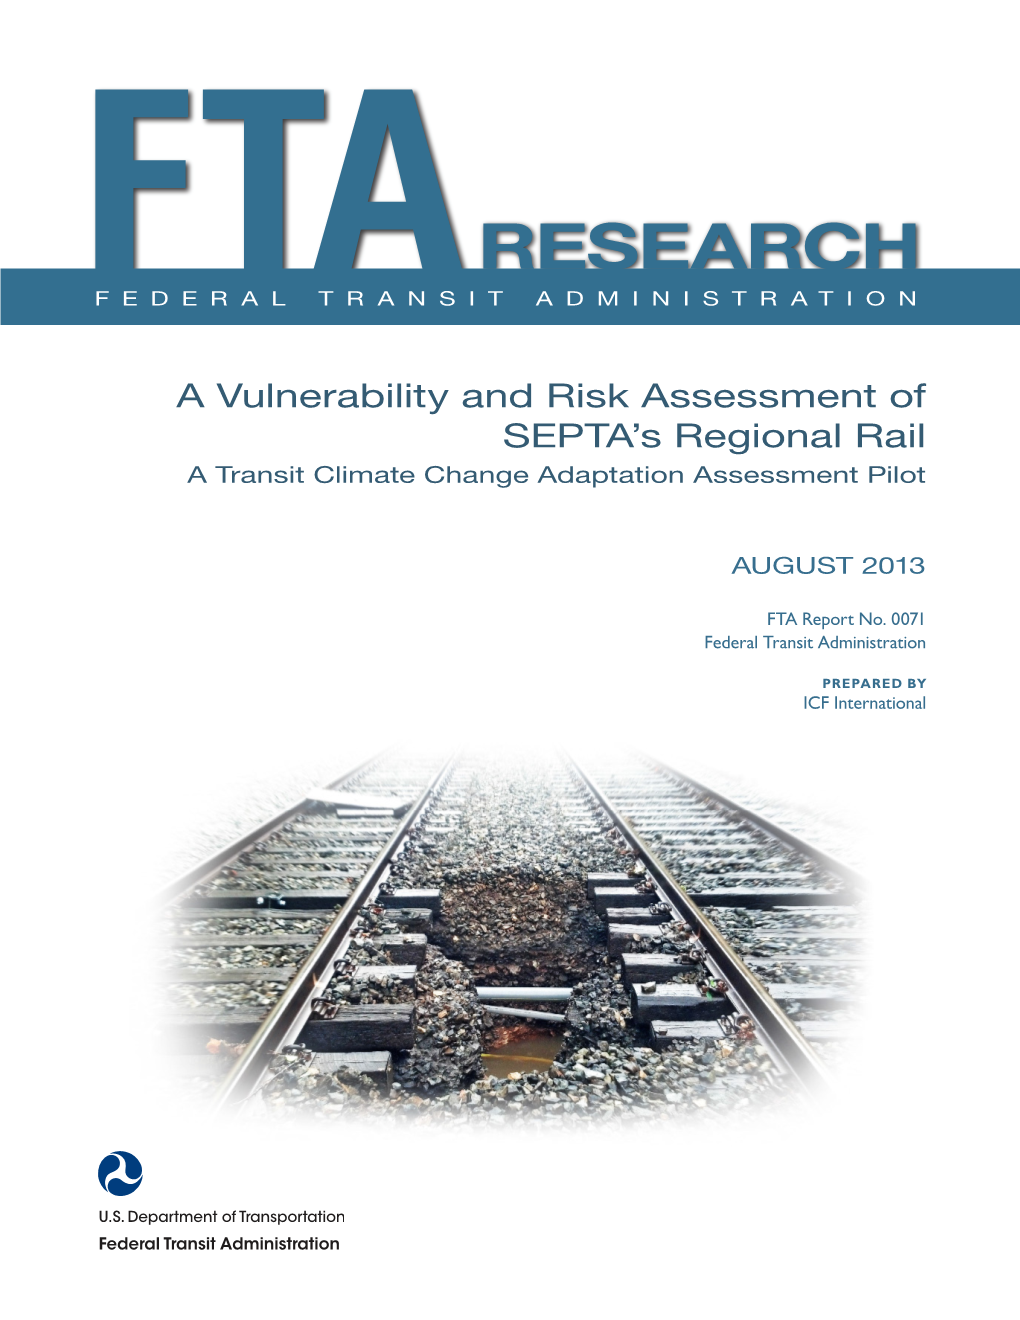 A Vulnerability and Risk Assessment of SEPTA's Regional Rail a Transit Climate Change Adaptation Assessment Pilot